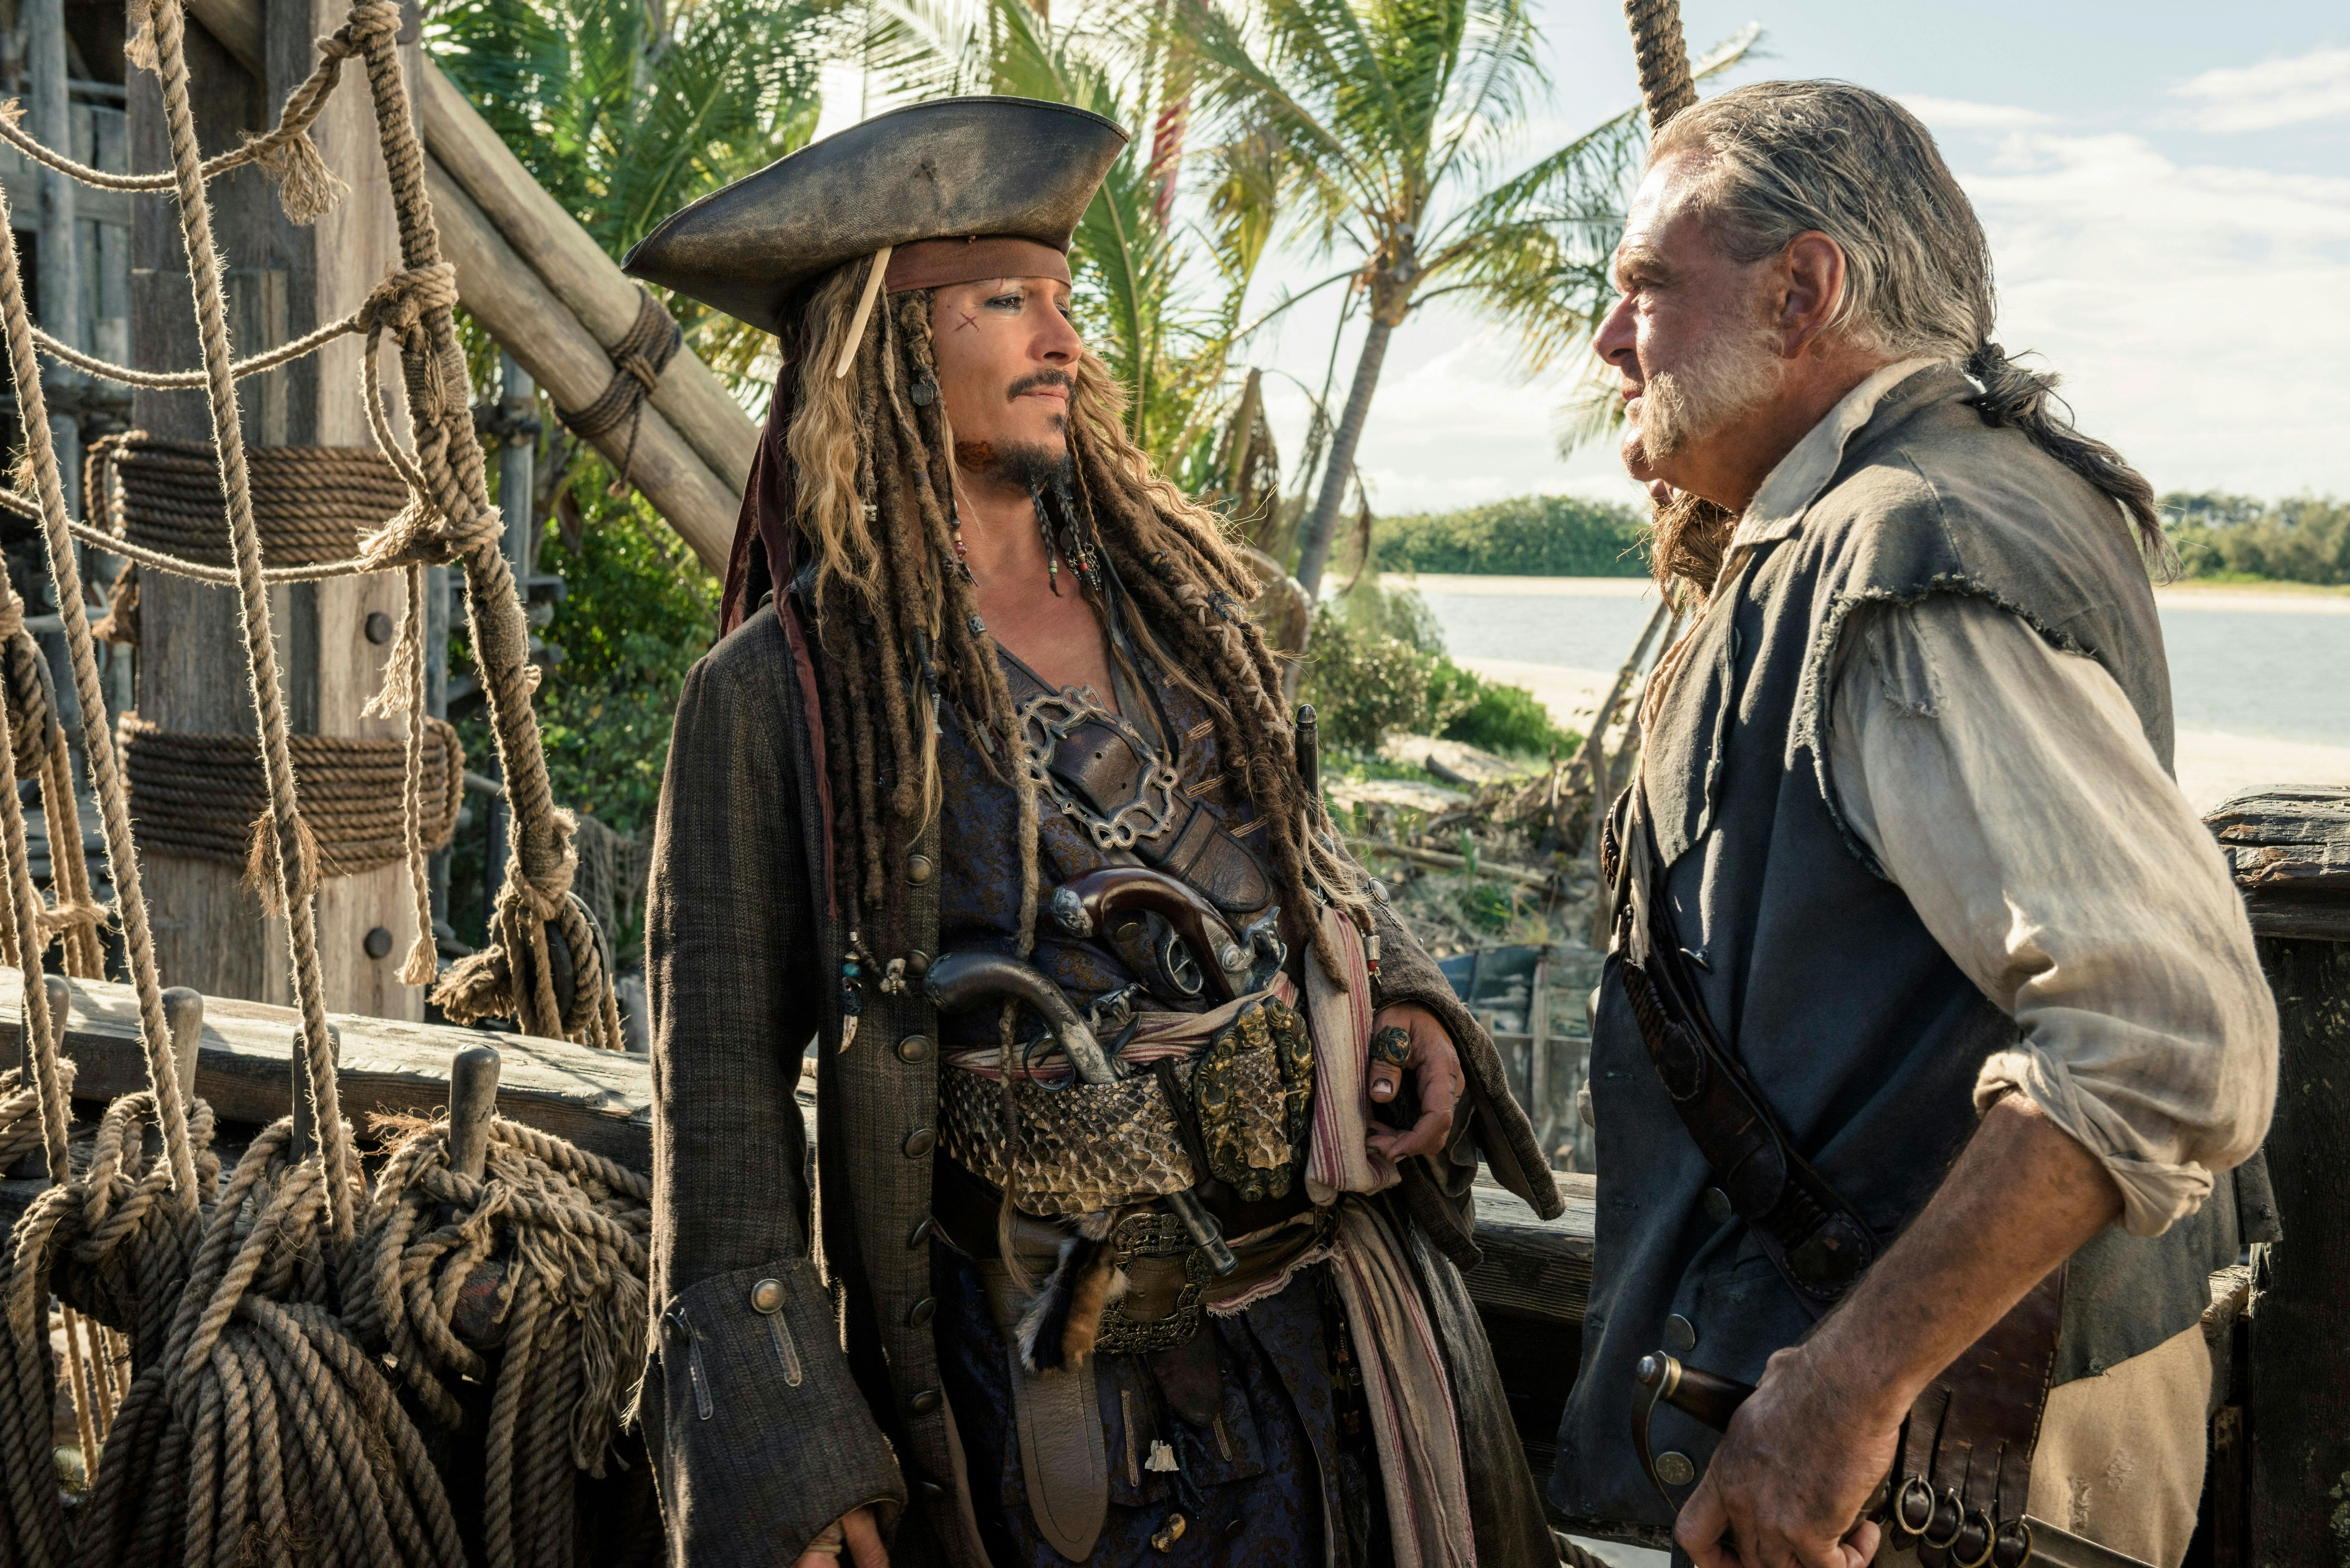 Pirates of the Caribbean: Dead Men Tell No Tales (2017) Johnny Depp & Kevin McNally *Filmstill - Editorial Use Only* CAP/KFS Image supplied by Capital Pictures